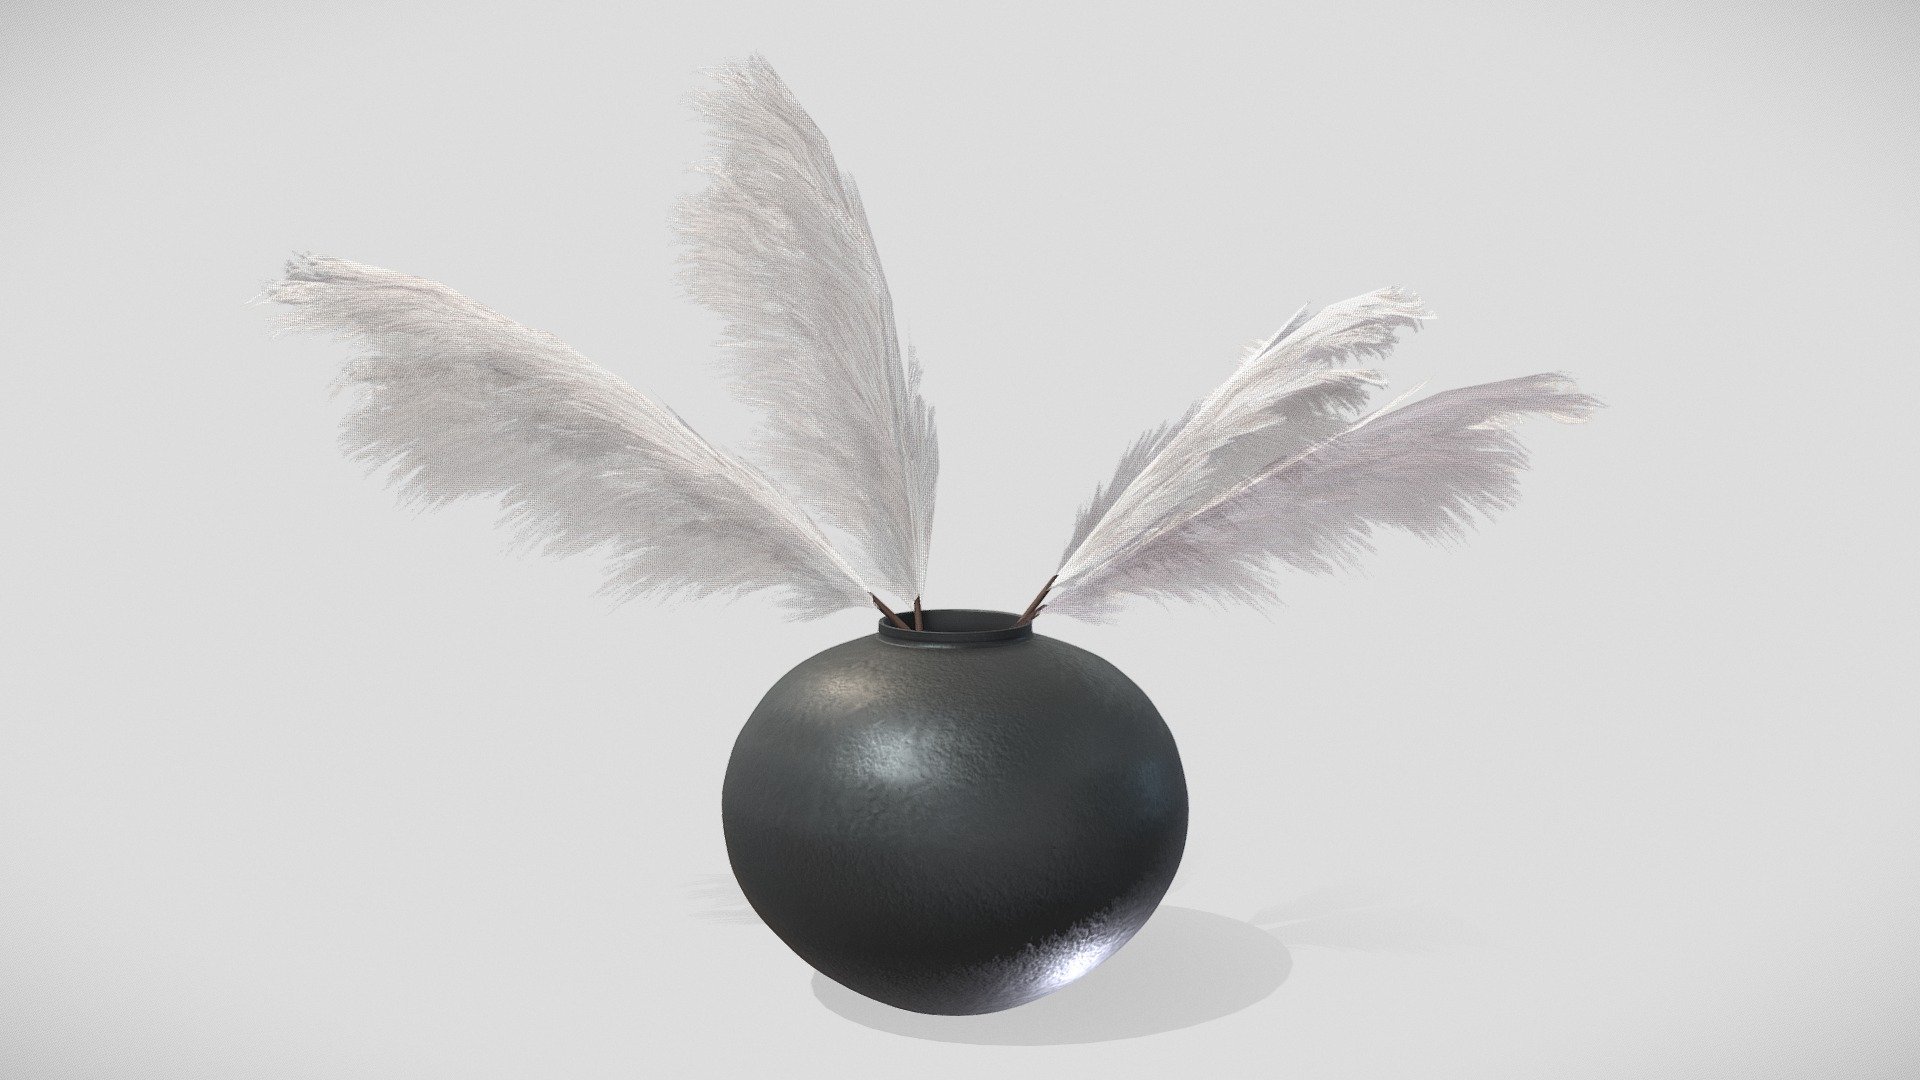 Model created for testing purposes only. Created using Modeling and Photo techinques

Products purchased from Crate and Barrel - Feathers in Pot - 3D model by Pulse Creative Services (@pulsecreativeservices) 3d model